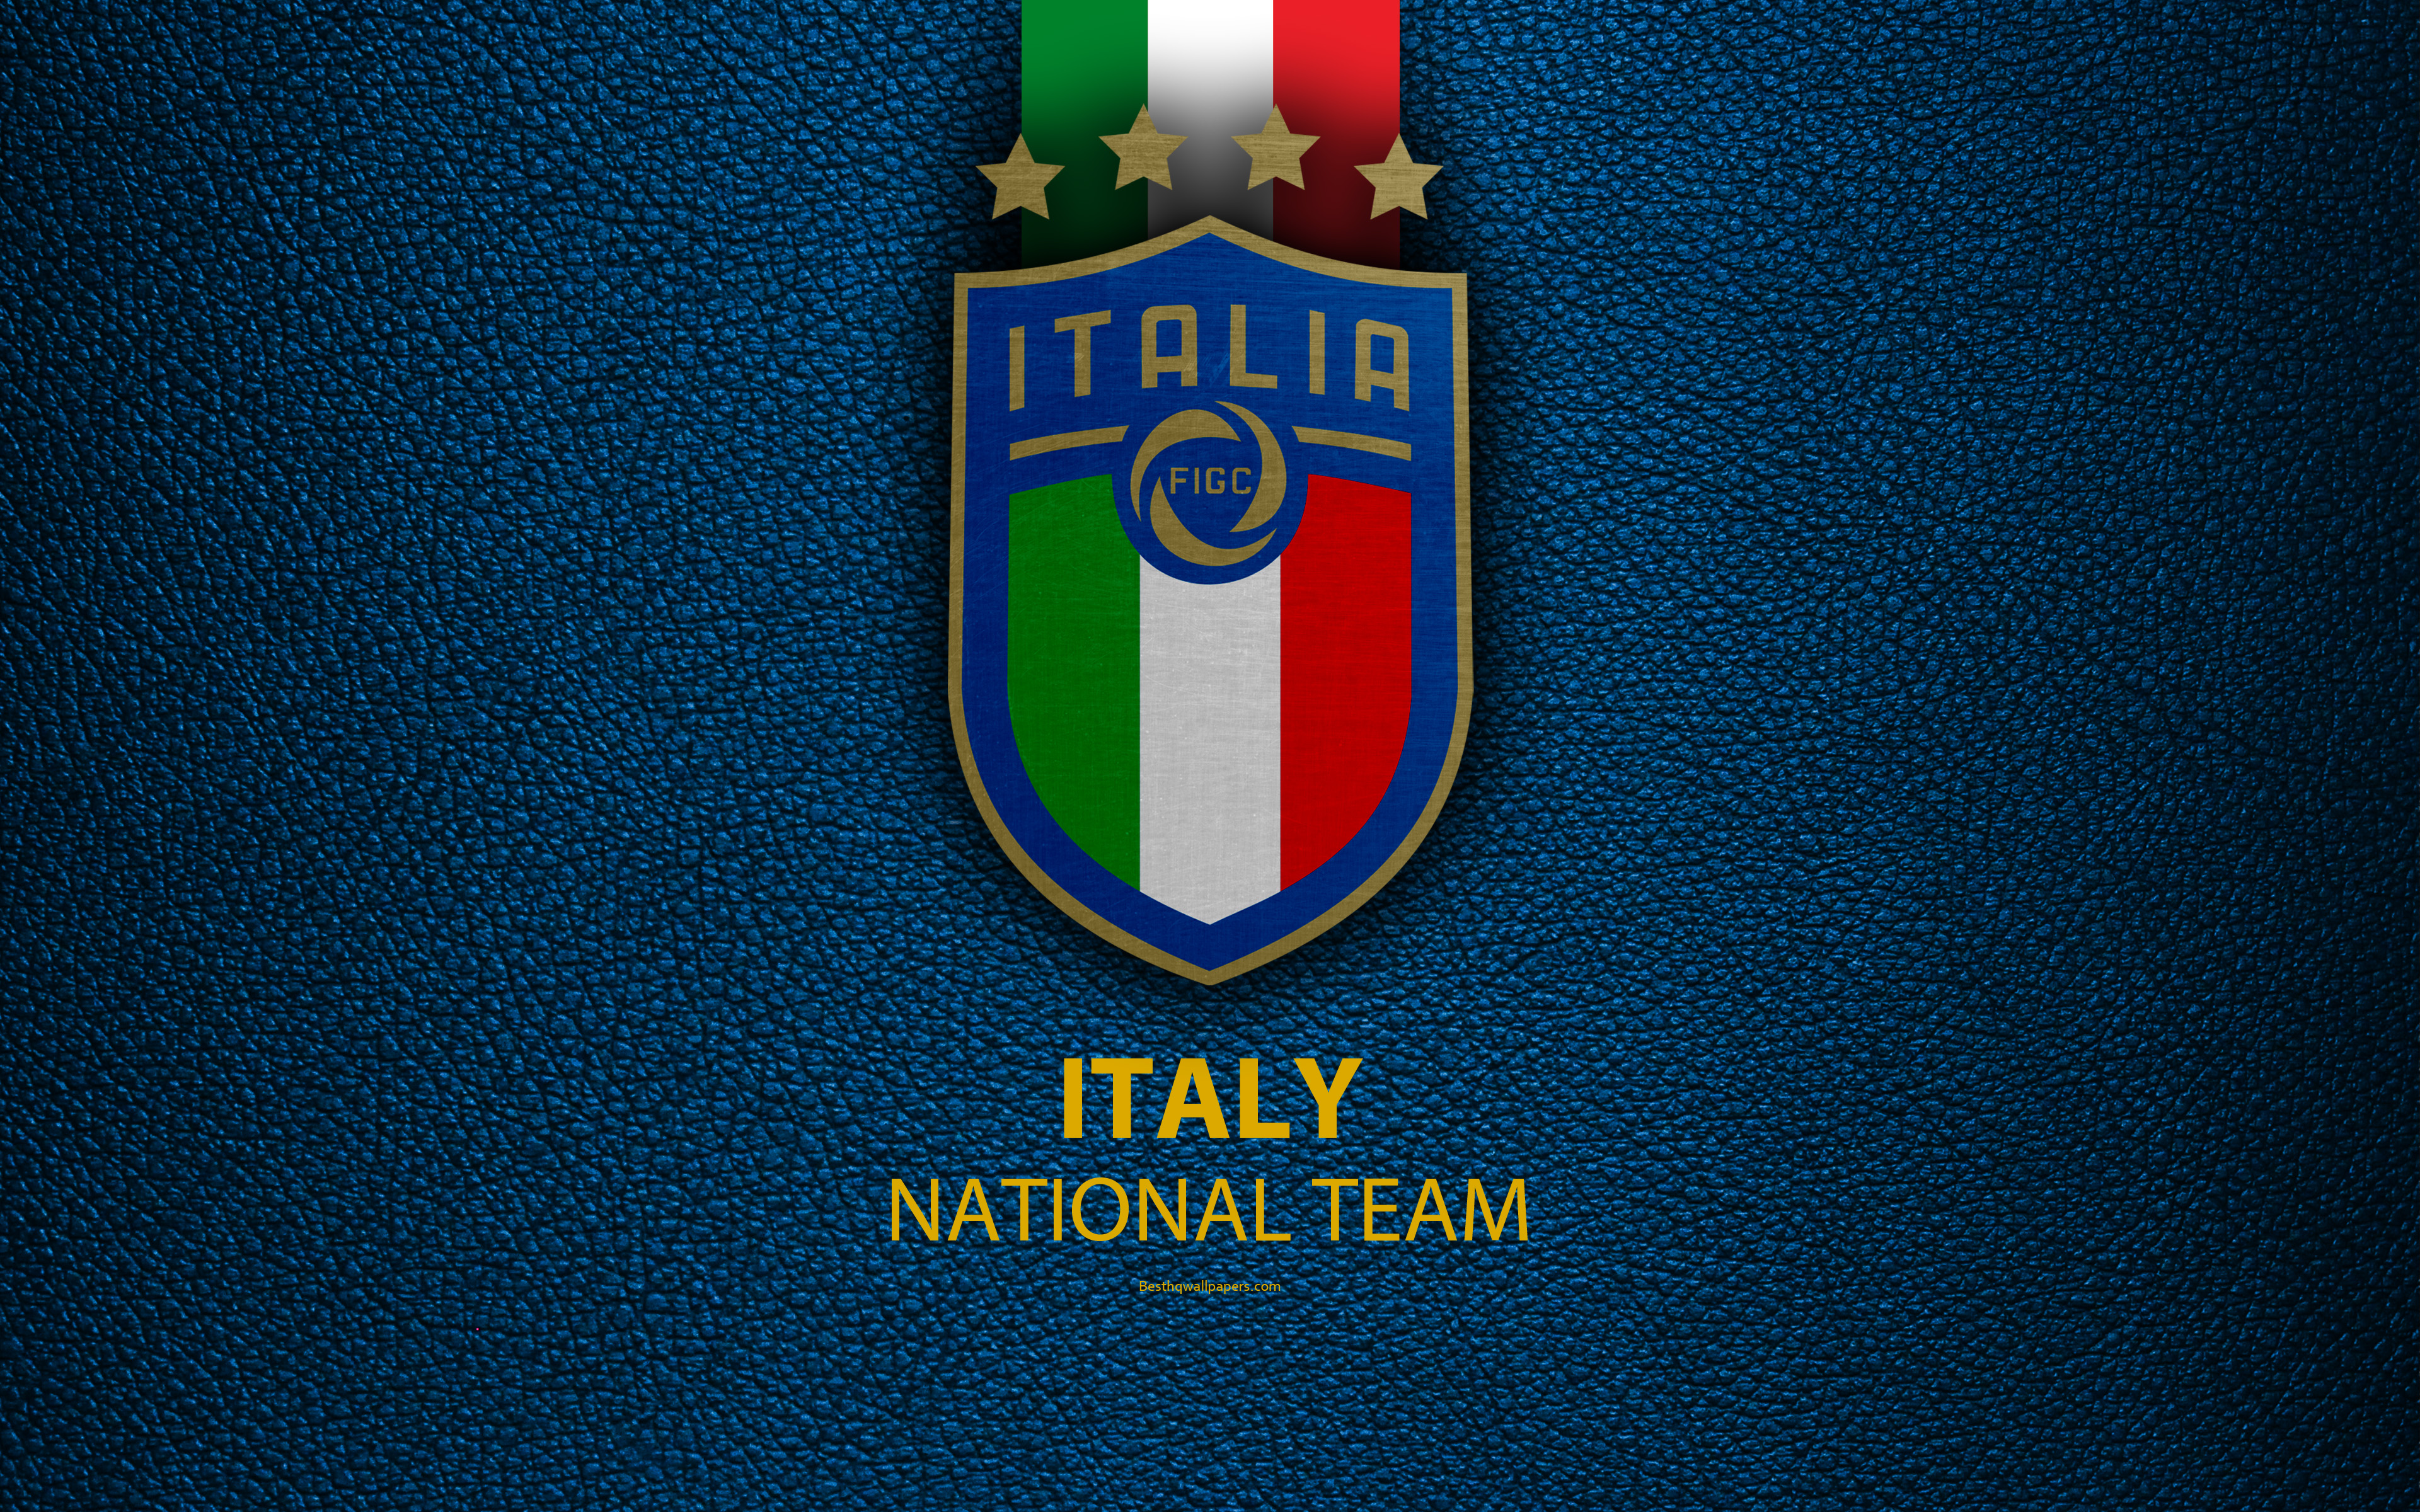 Italy National Football Team, 4k, Blue Leather Texture, - Italy National Team Logo - HD Wallpaper 